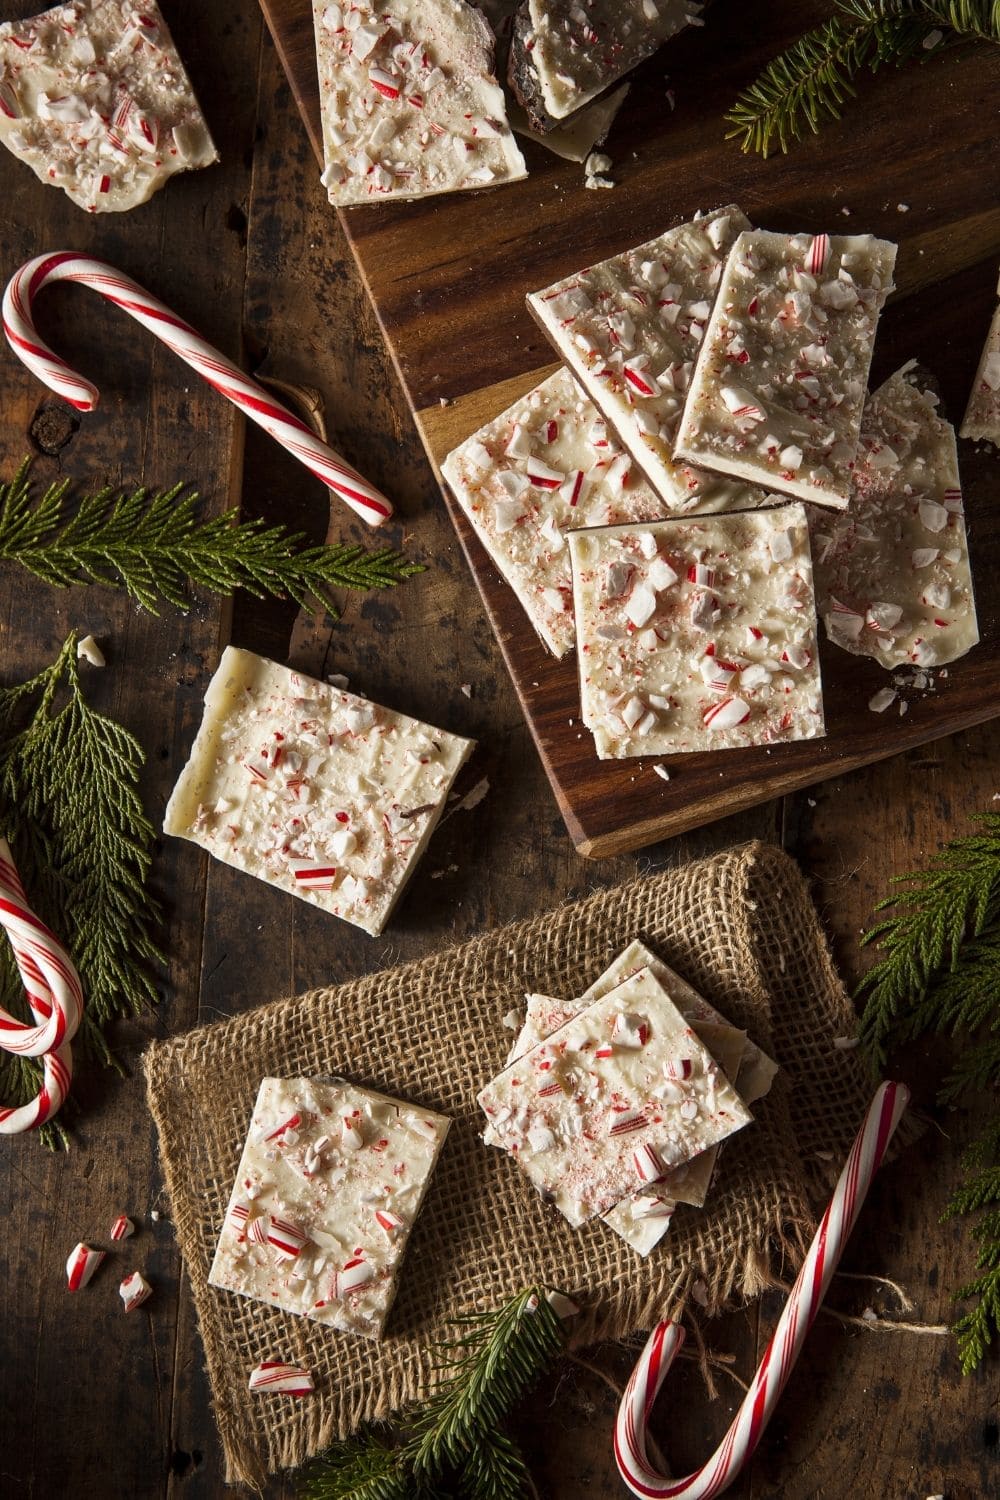 Peppermint bark on a cutting board with candy canes.